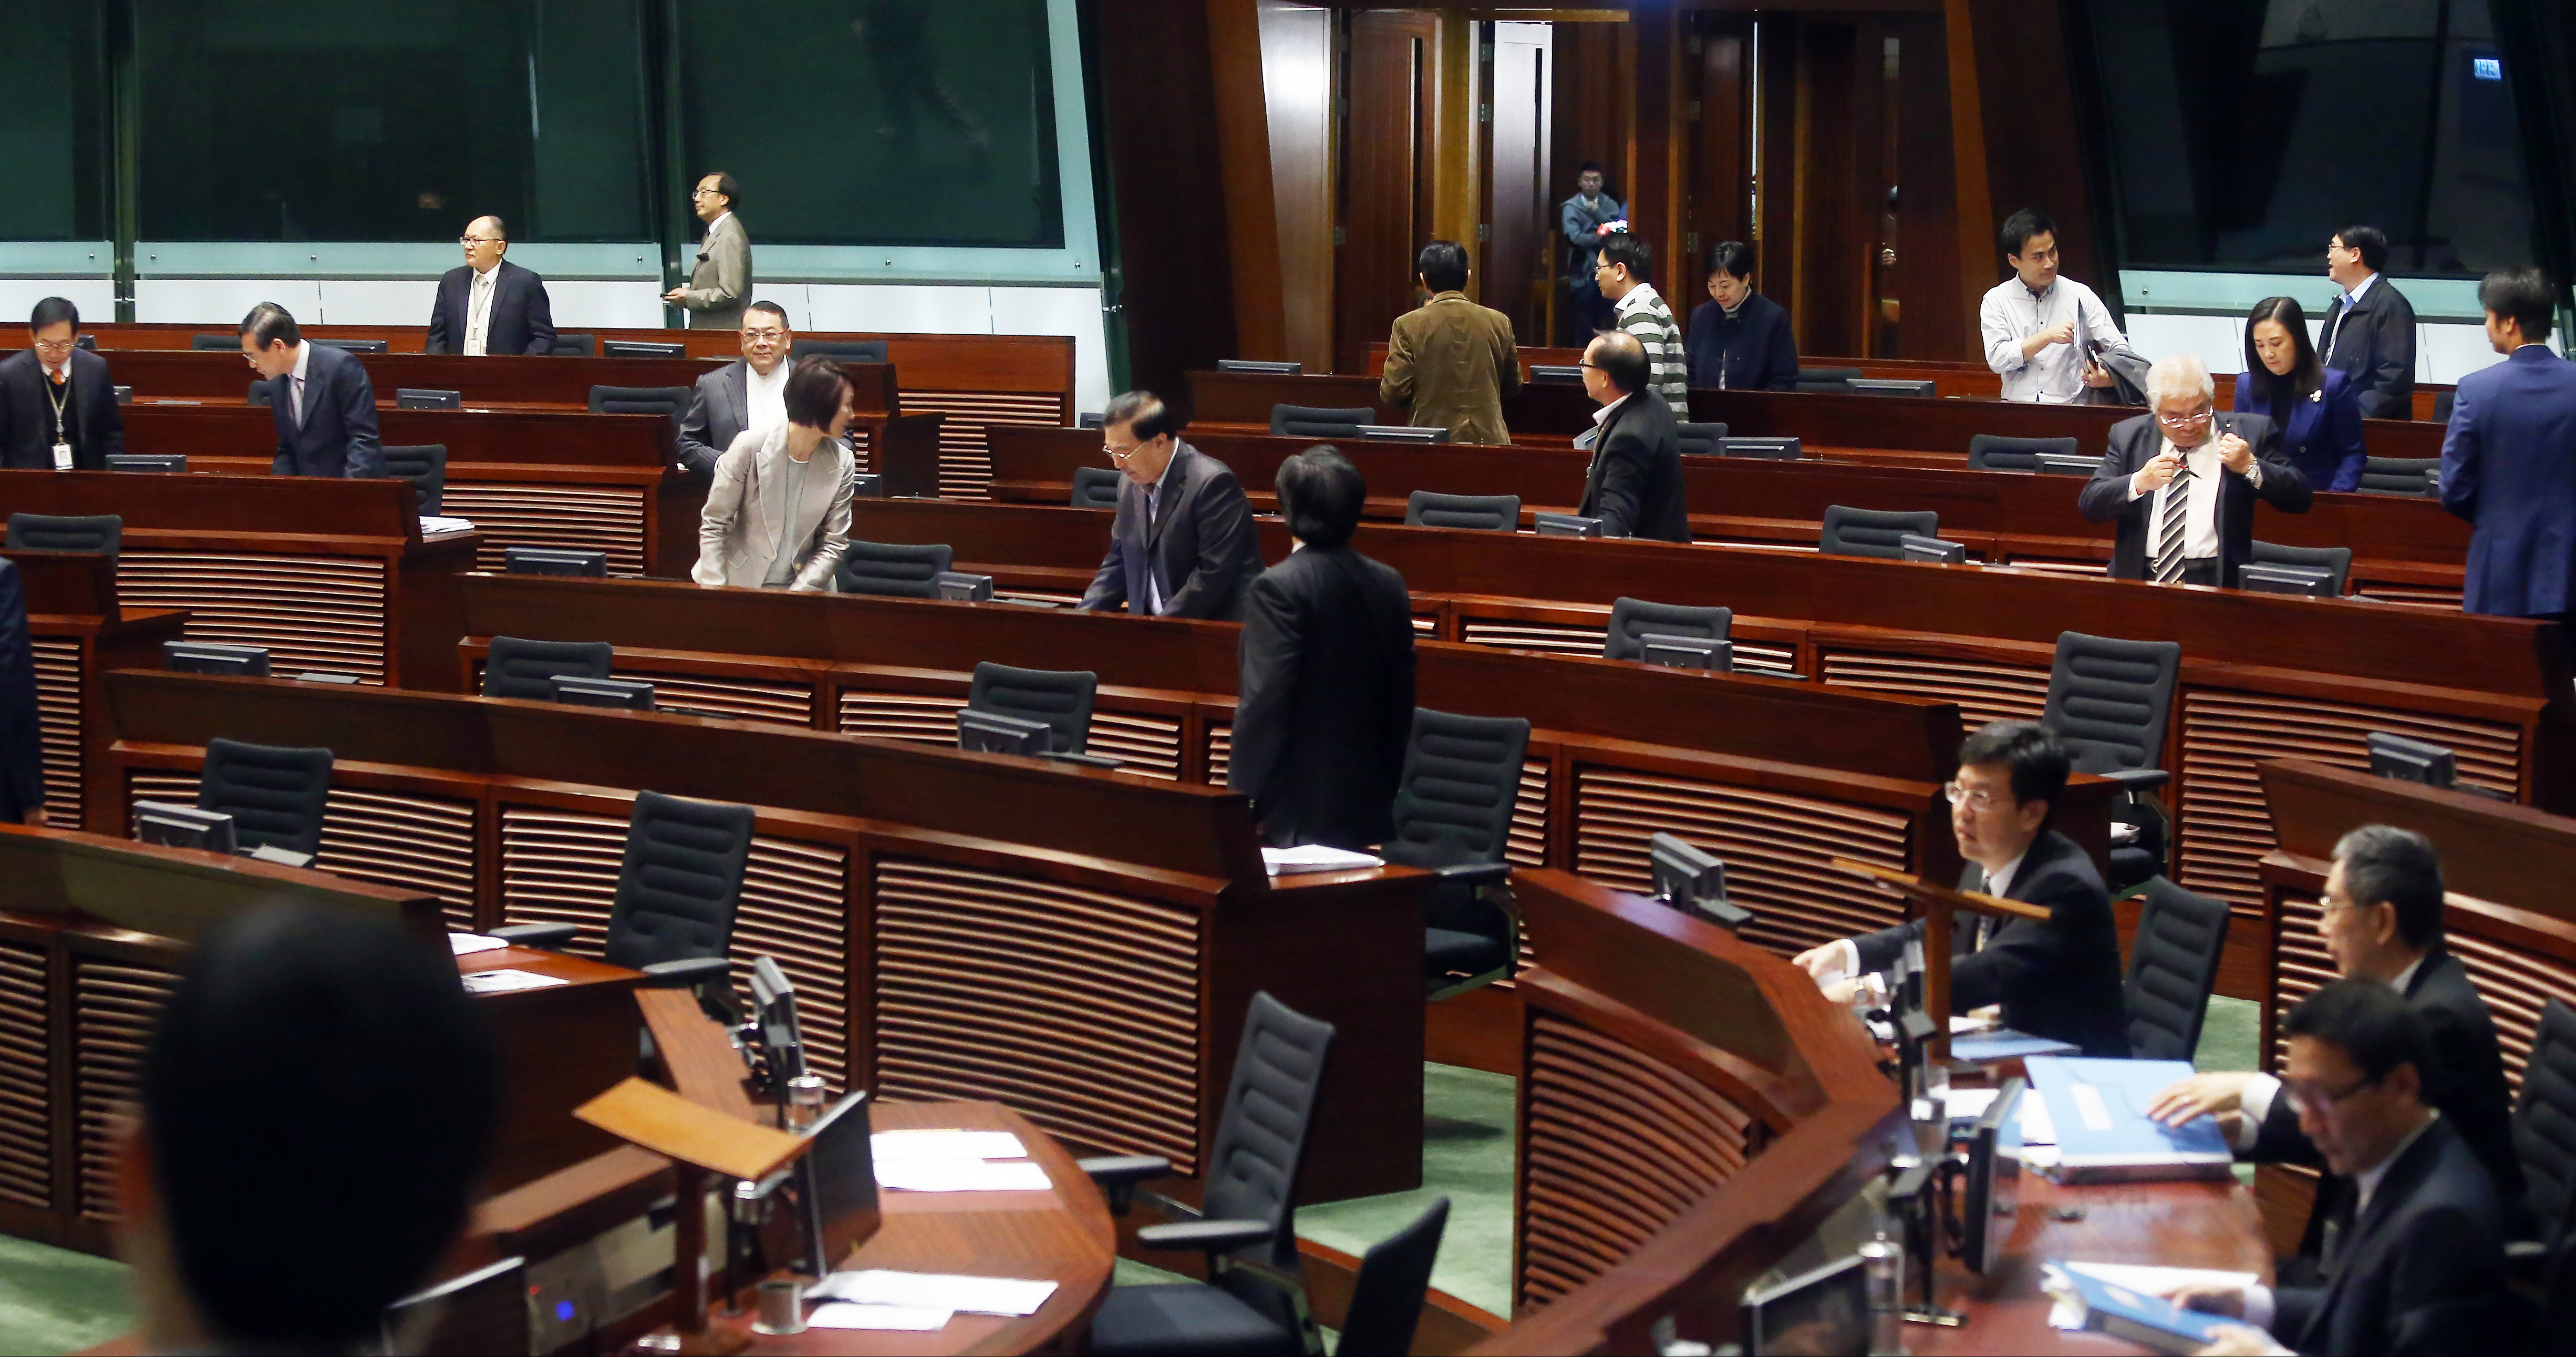 Legislative Council meeting have frequently been adjourned recently because of insufficient quorum. Photo: Sam Tsang